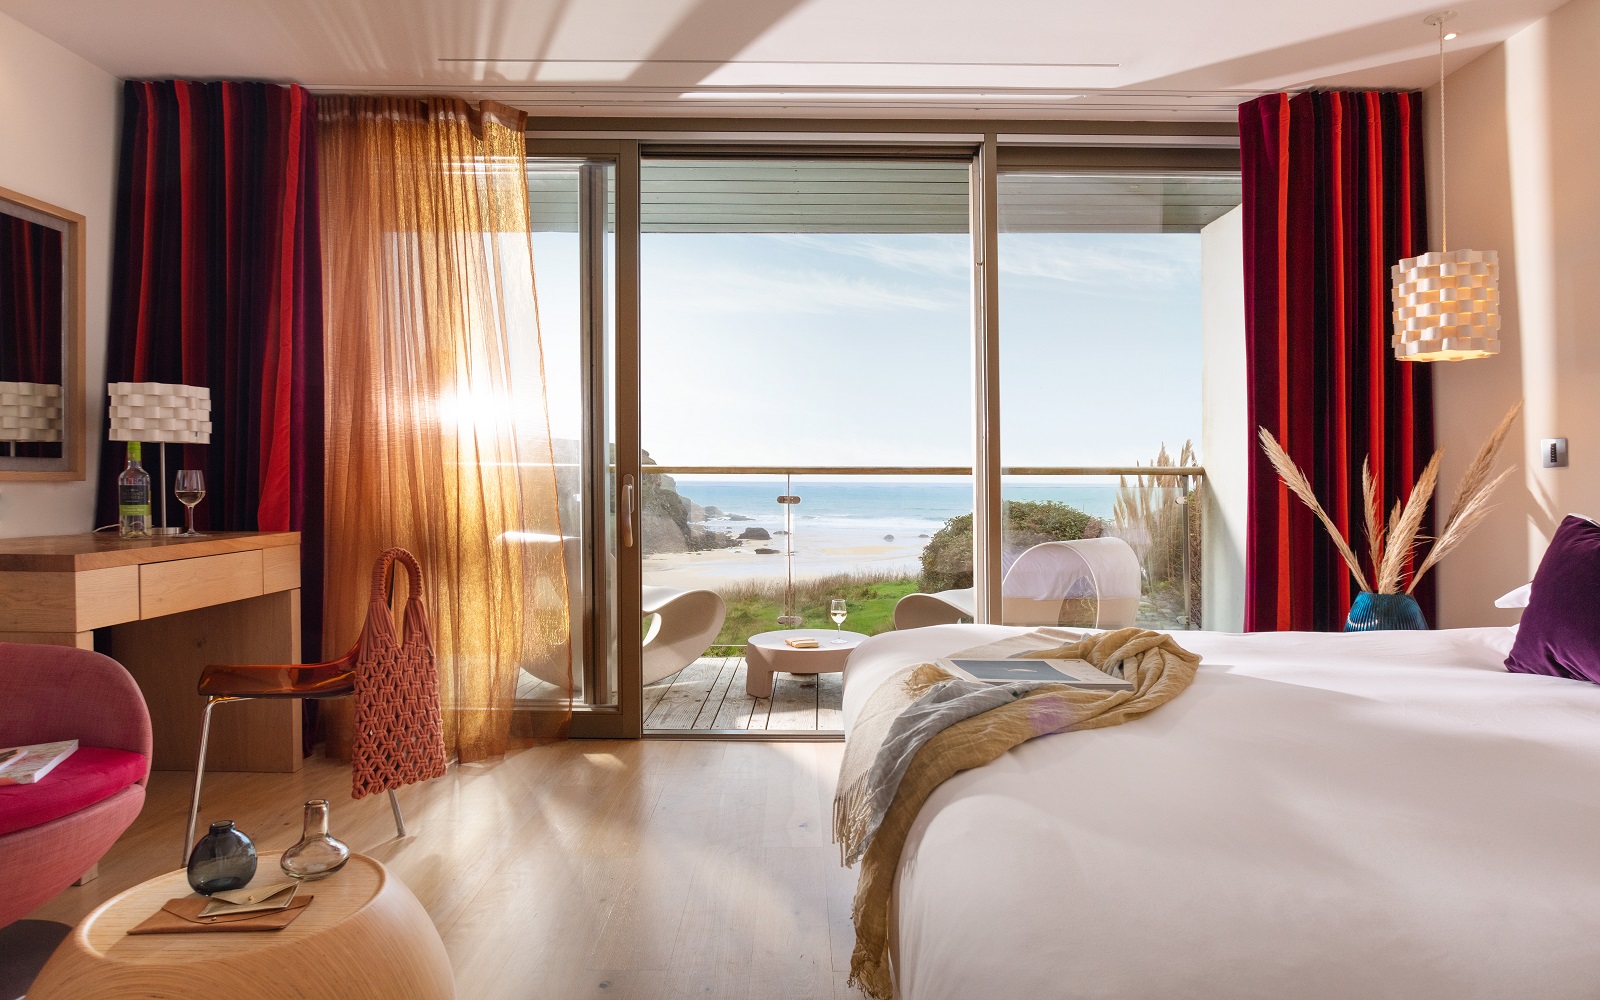 guestroom in Scarlet hotel on cornish coast with views on to beach